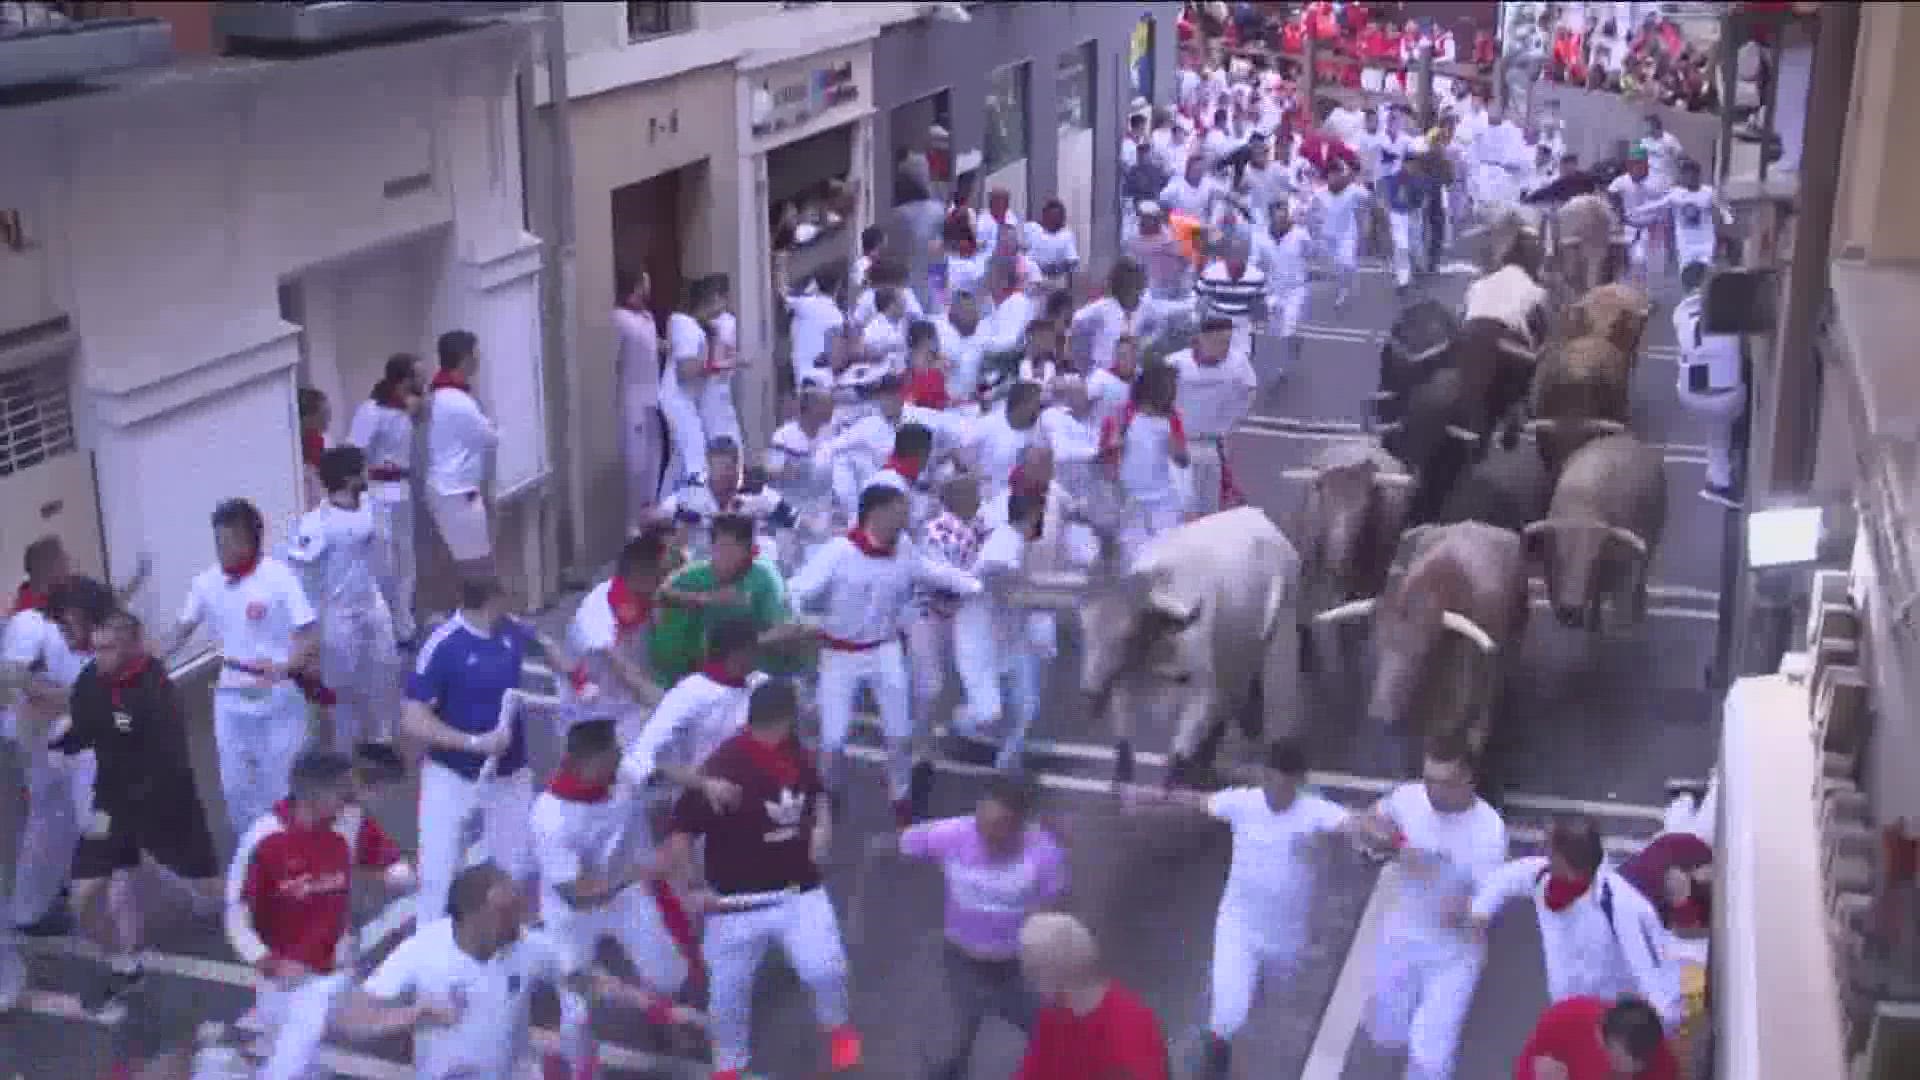 The first Running of the Bulls in three years is underway. It's part of the San Fermin Festival.